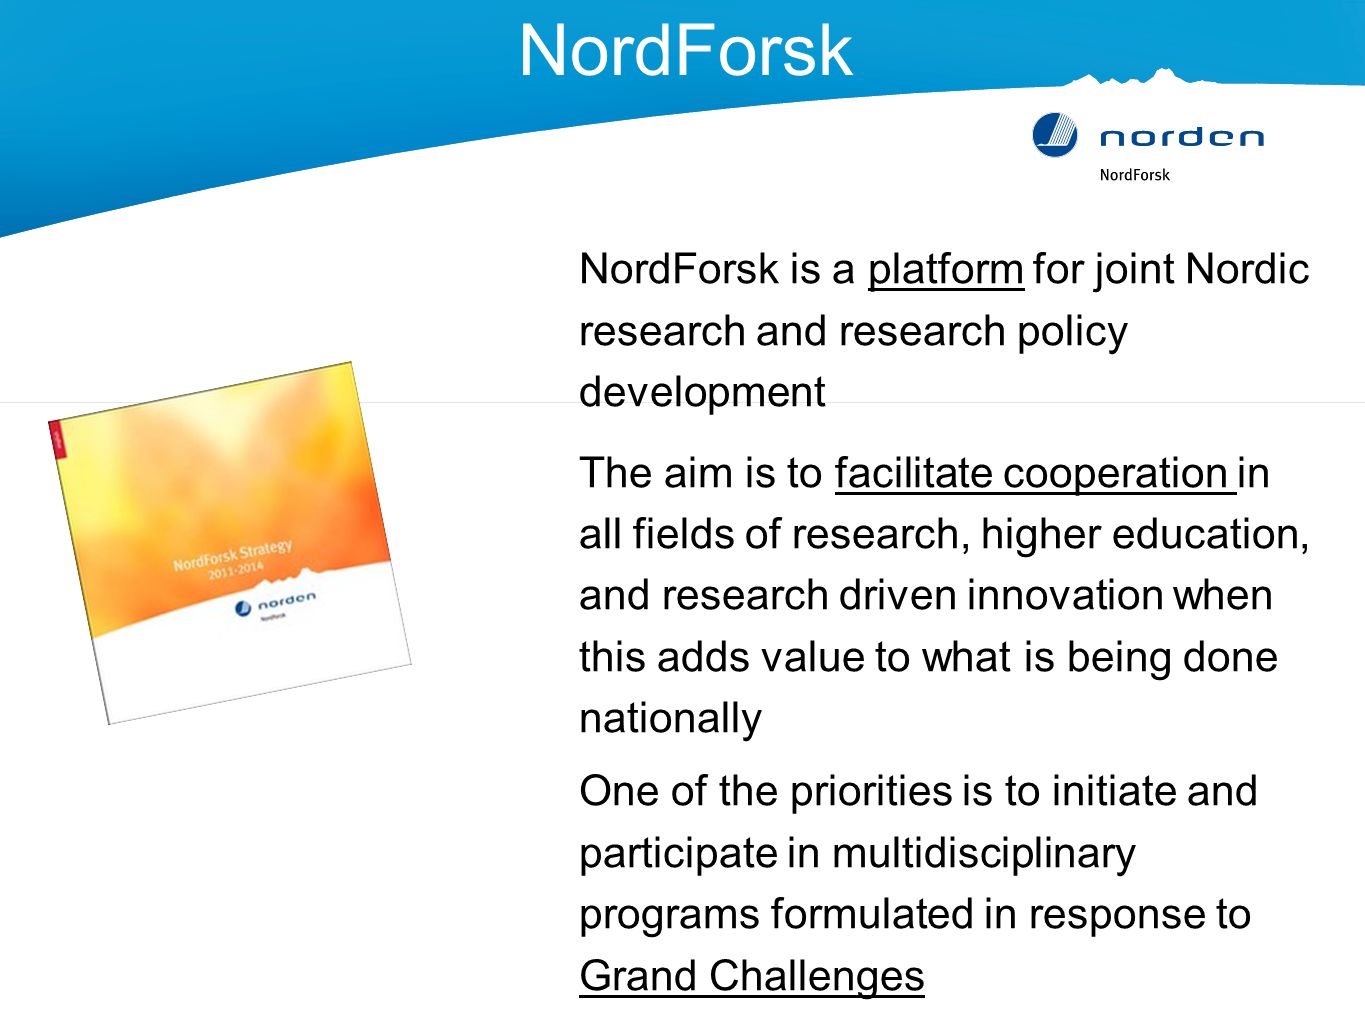 NordForsk NordForsk is a platform for joint Nordic research and research policy development The aim is to facilitate cooperation in all fields of research, higher education, and research driven innovation when this adds value to what is being done nationally One of the priorities is to initiate and participate in multidisciplinary programs formulated in response to Grand Challenges